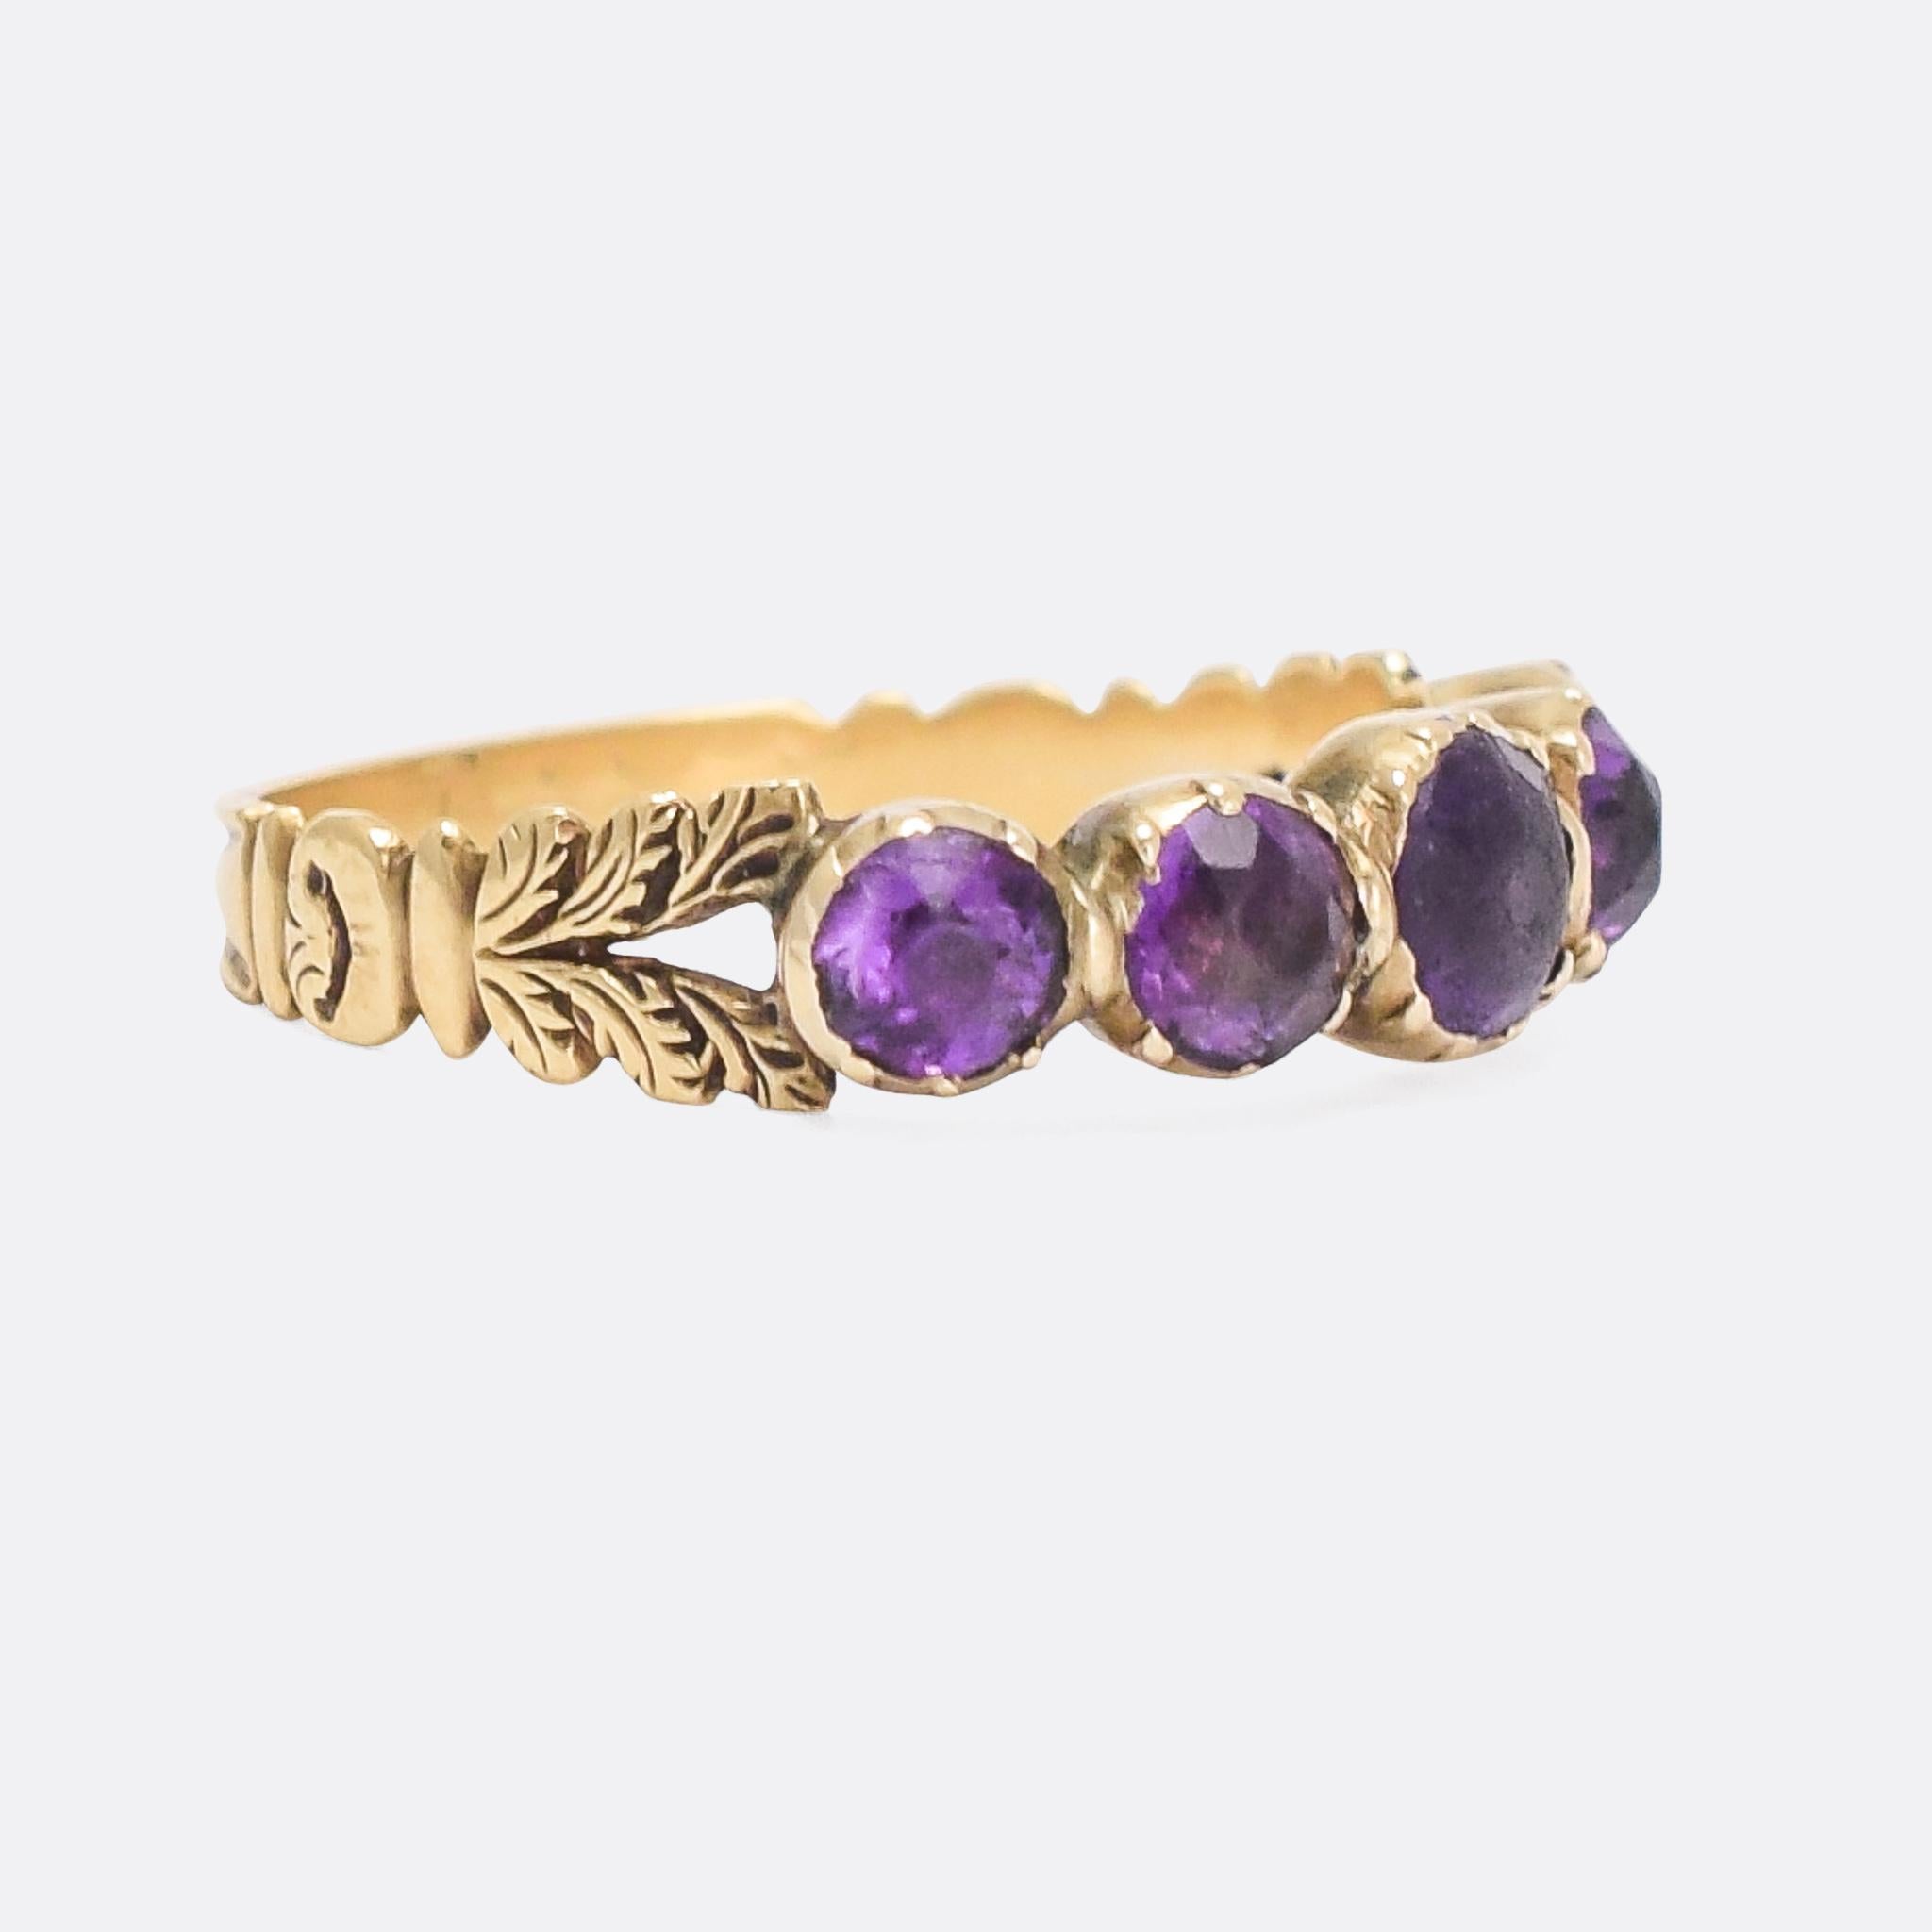 An elegant Georgian half-hoop band set with purple paste stones in foiled settings. The bifurcated shoulders have been adorned with intricate hand-chased detailing, joined to the band with a scrolled flourish. The foil behind the stones really